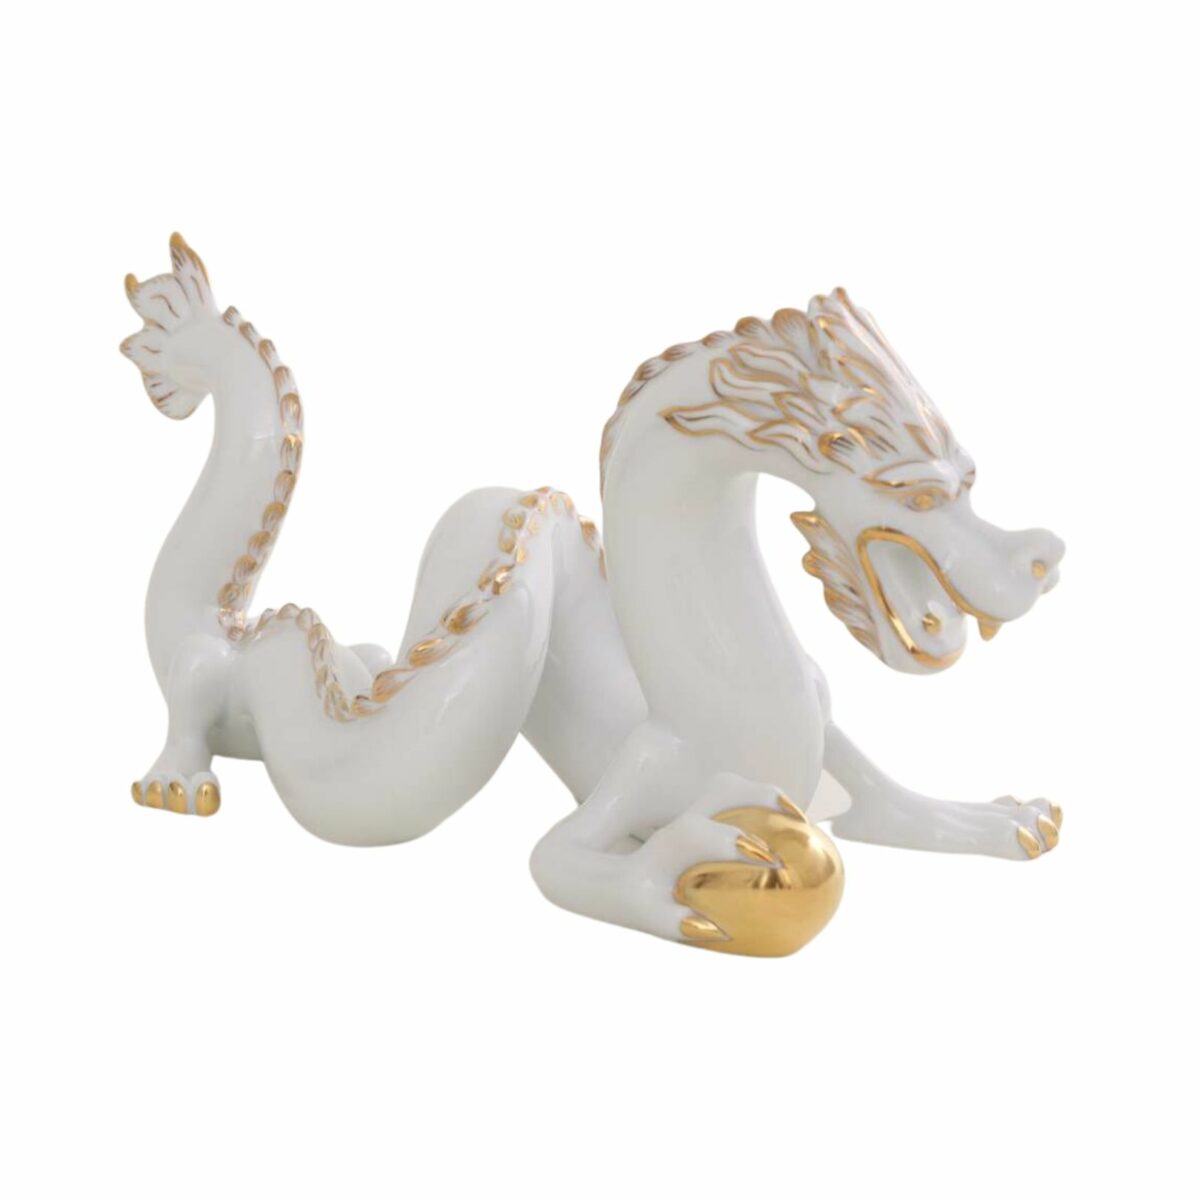 Herend-Dragon-Large-Figurine-White-Gold-15601-0-00-A-OR1